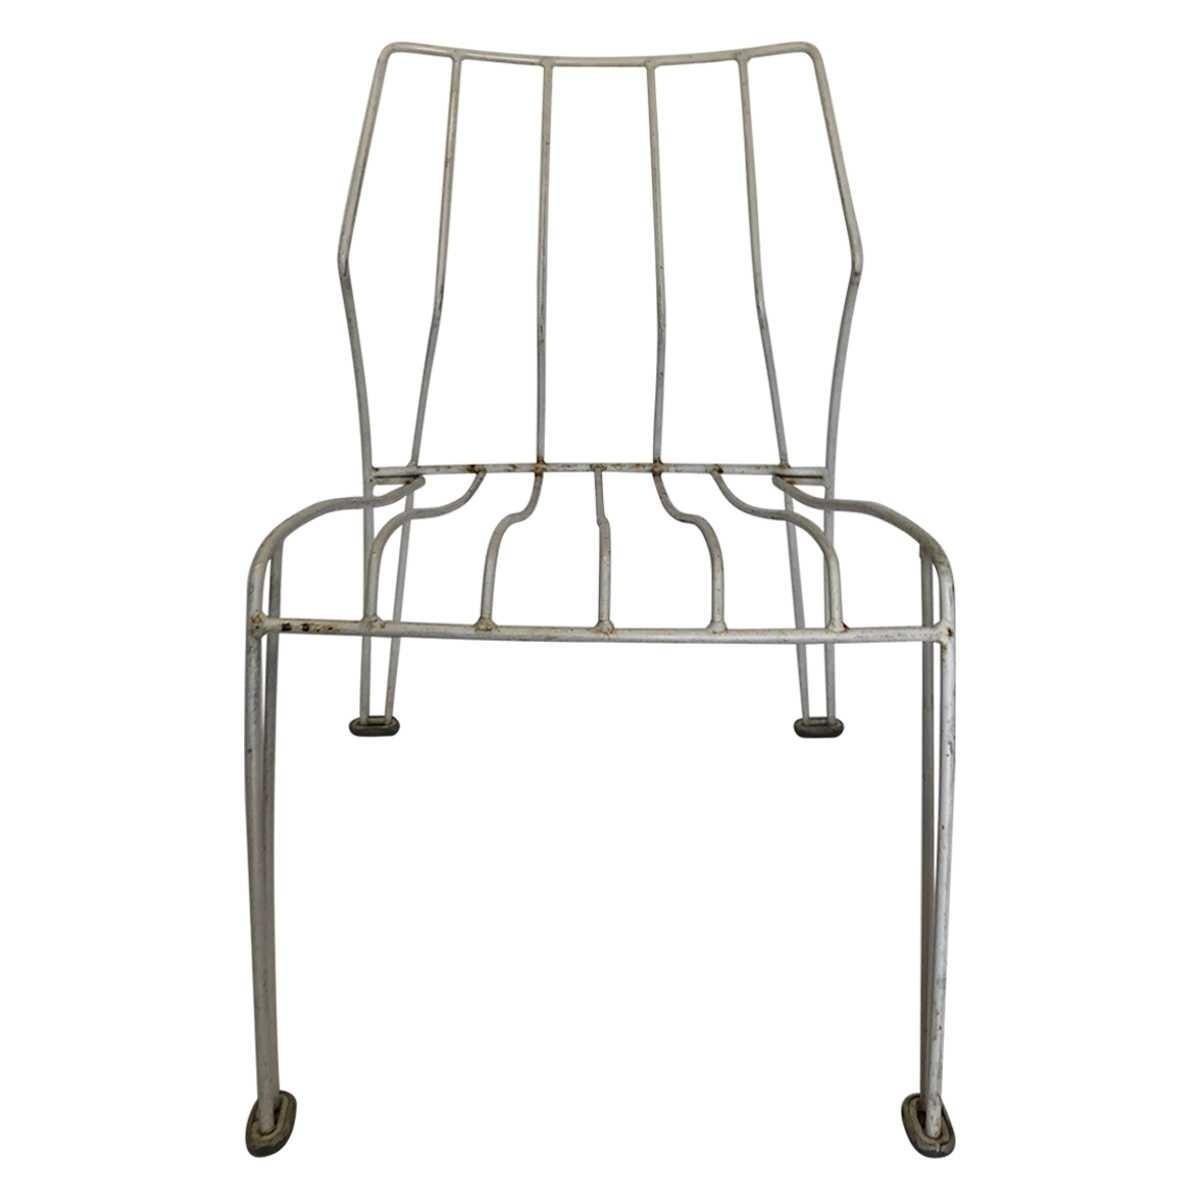 Industrial Trio of Stack-able Steel Garden Chairs, 1970-1979 For Sale